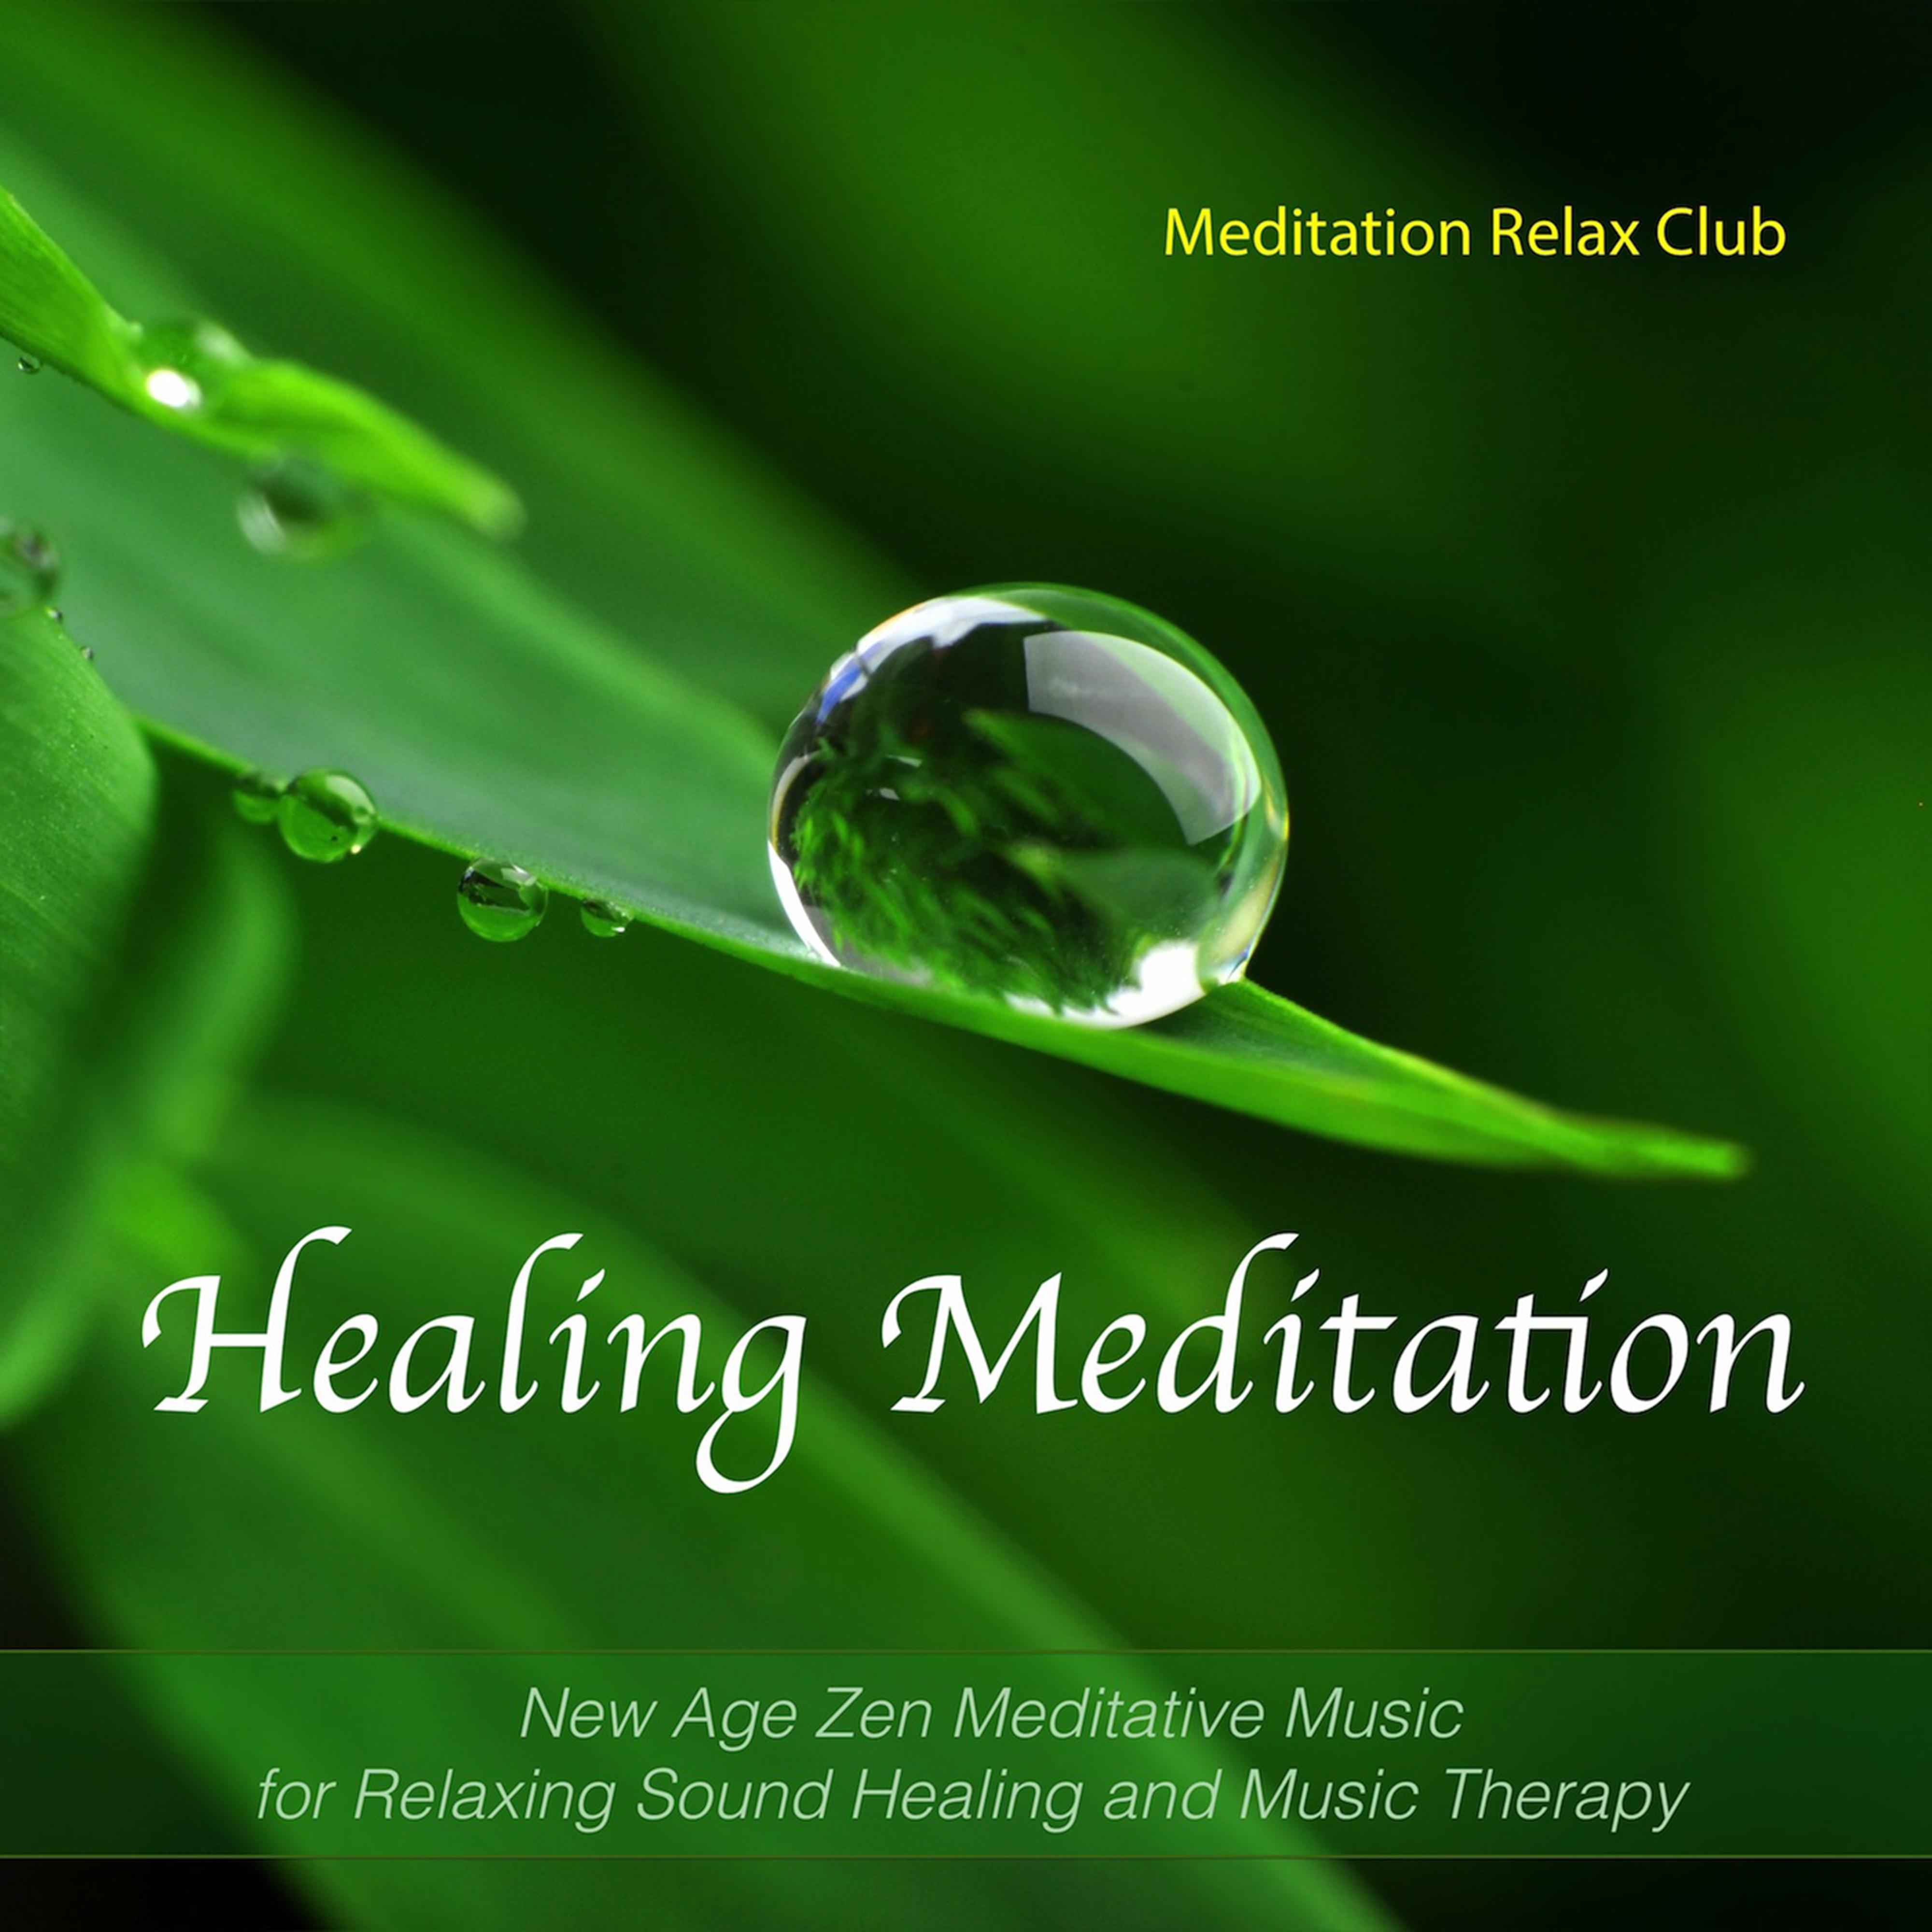 Healing Meditation - New Age Zen Meditative Music for Relaxing Sound Healing and Music Therapy